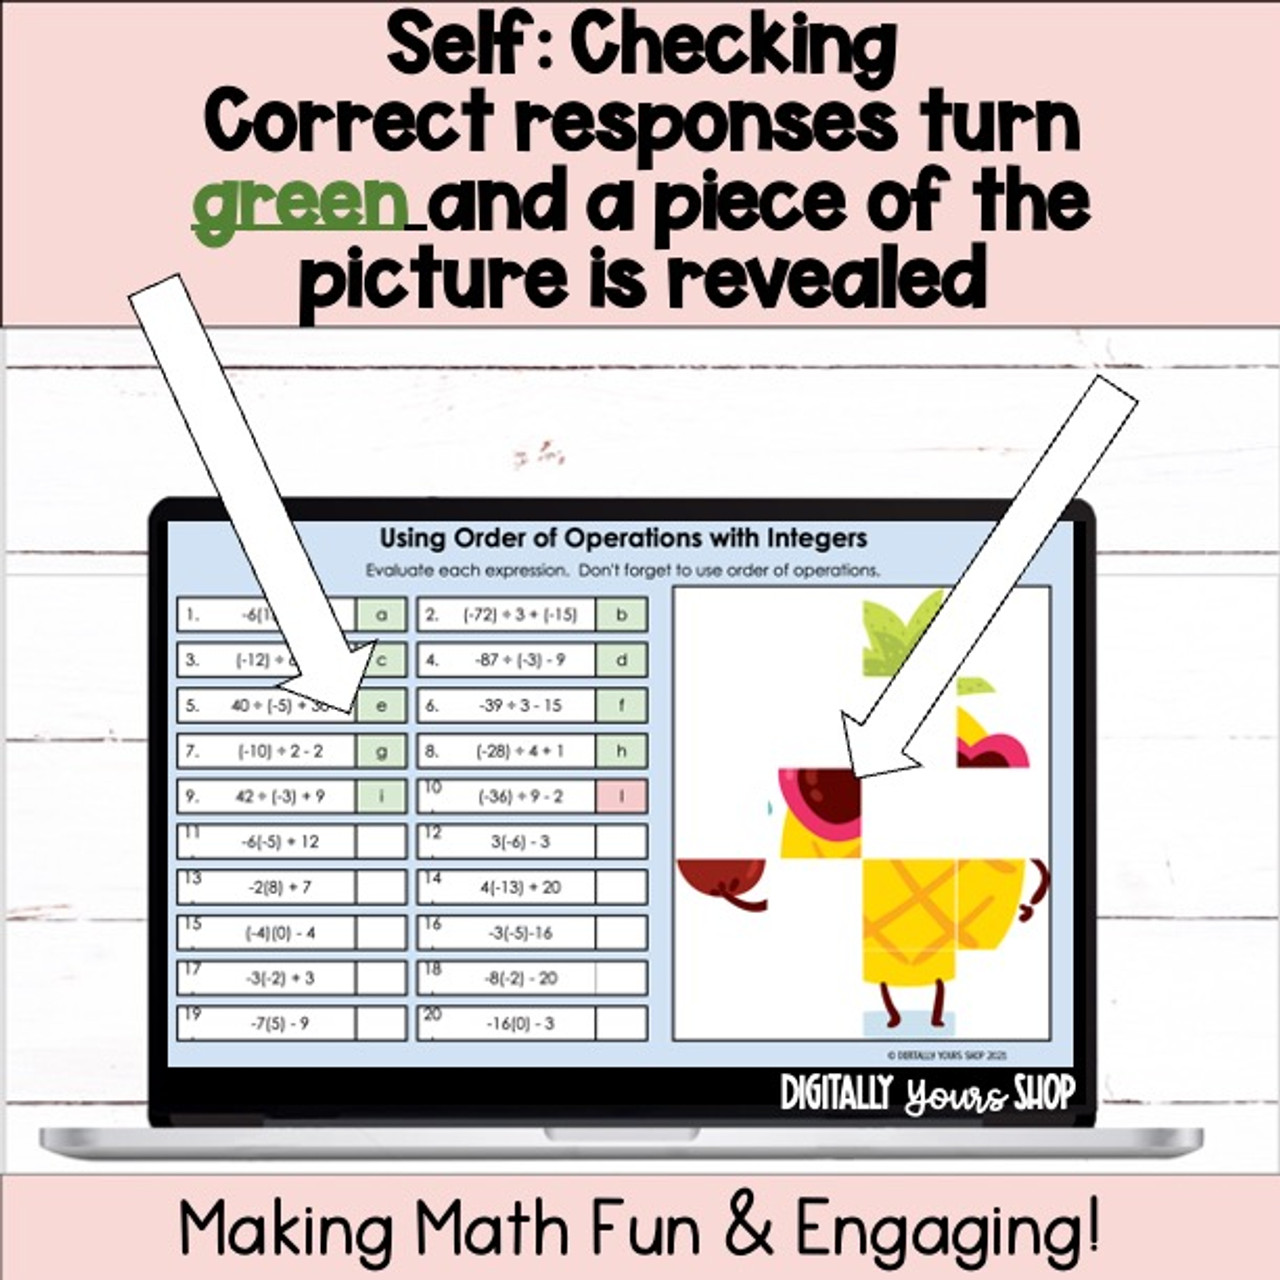 Order of Operations with Integers Self-Checking Digital Activity